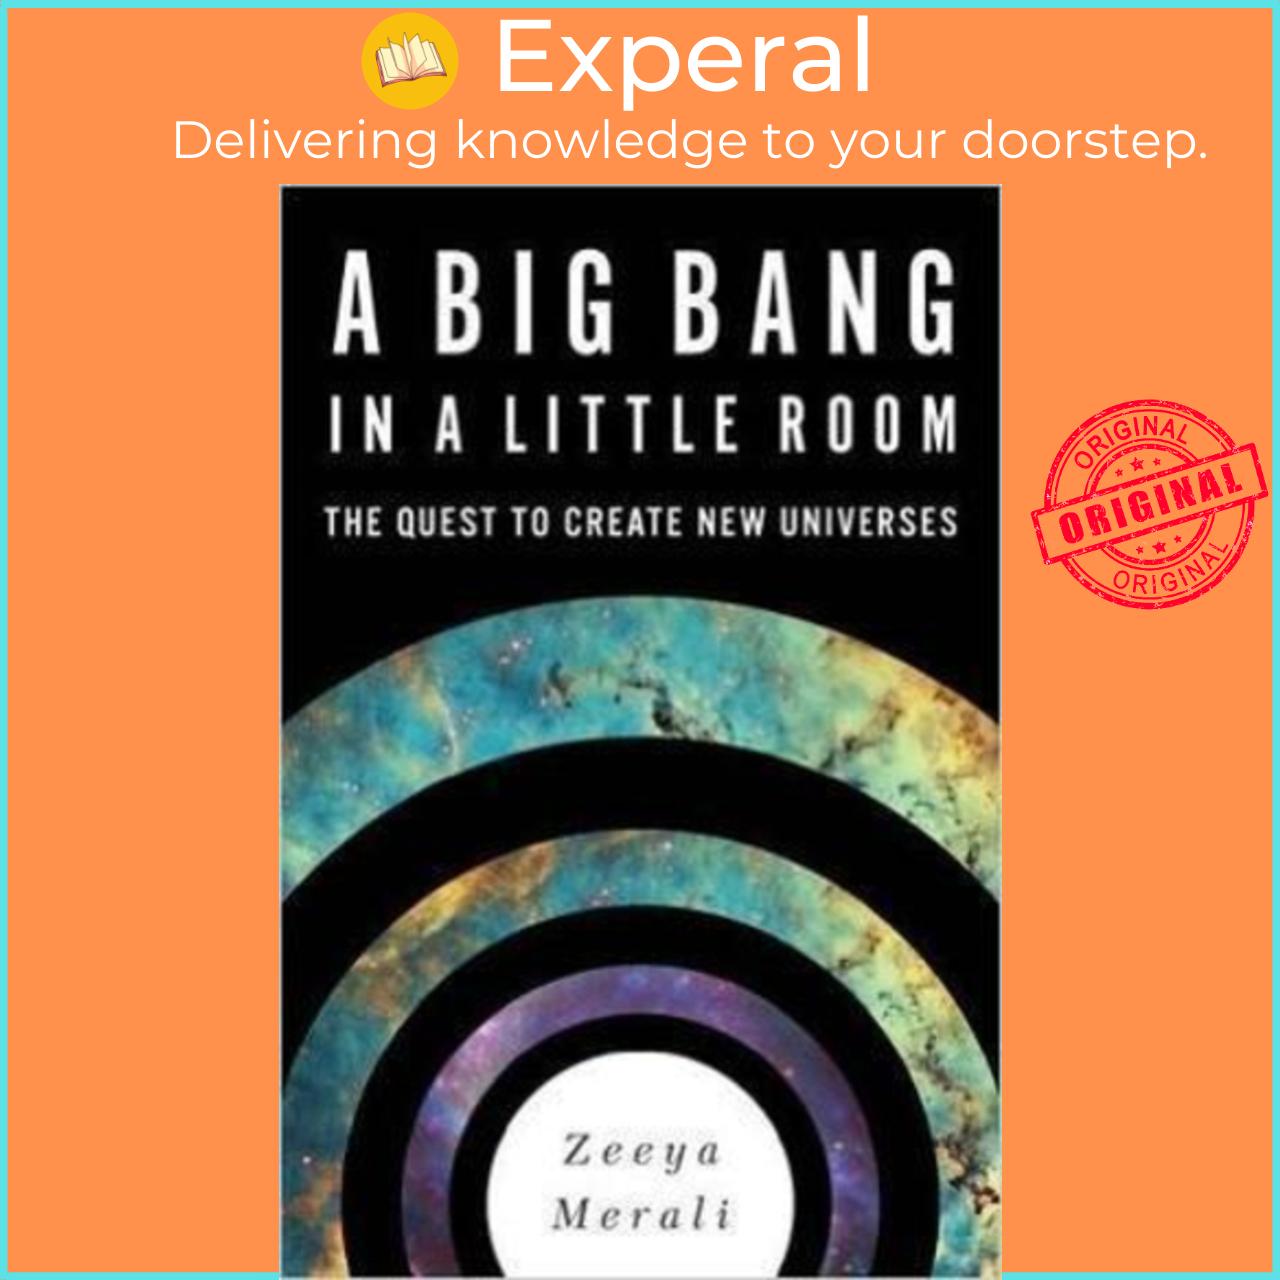 Sách - A Big Bang in a Little Room : The Quest to Create New Universes by Zeeya Merali (US edition, hardcover)